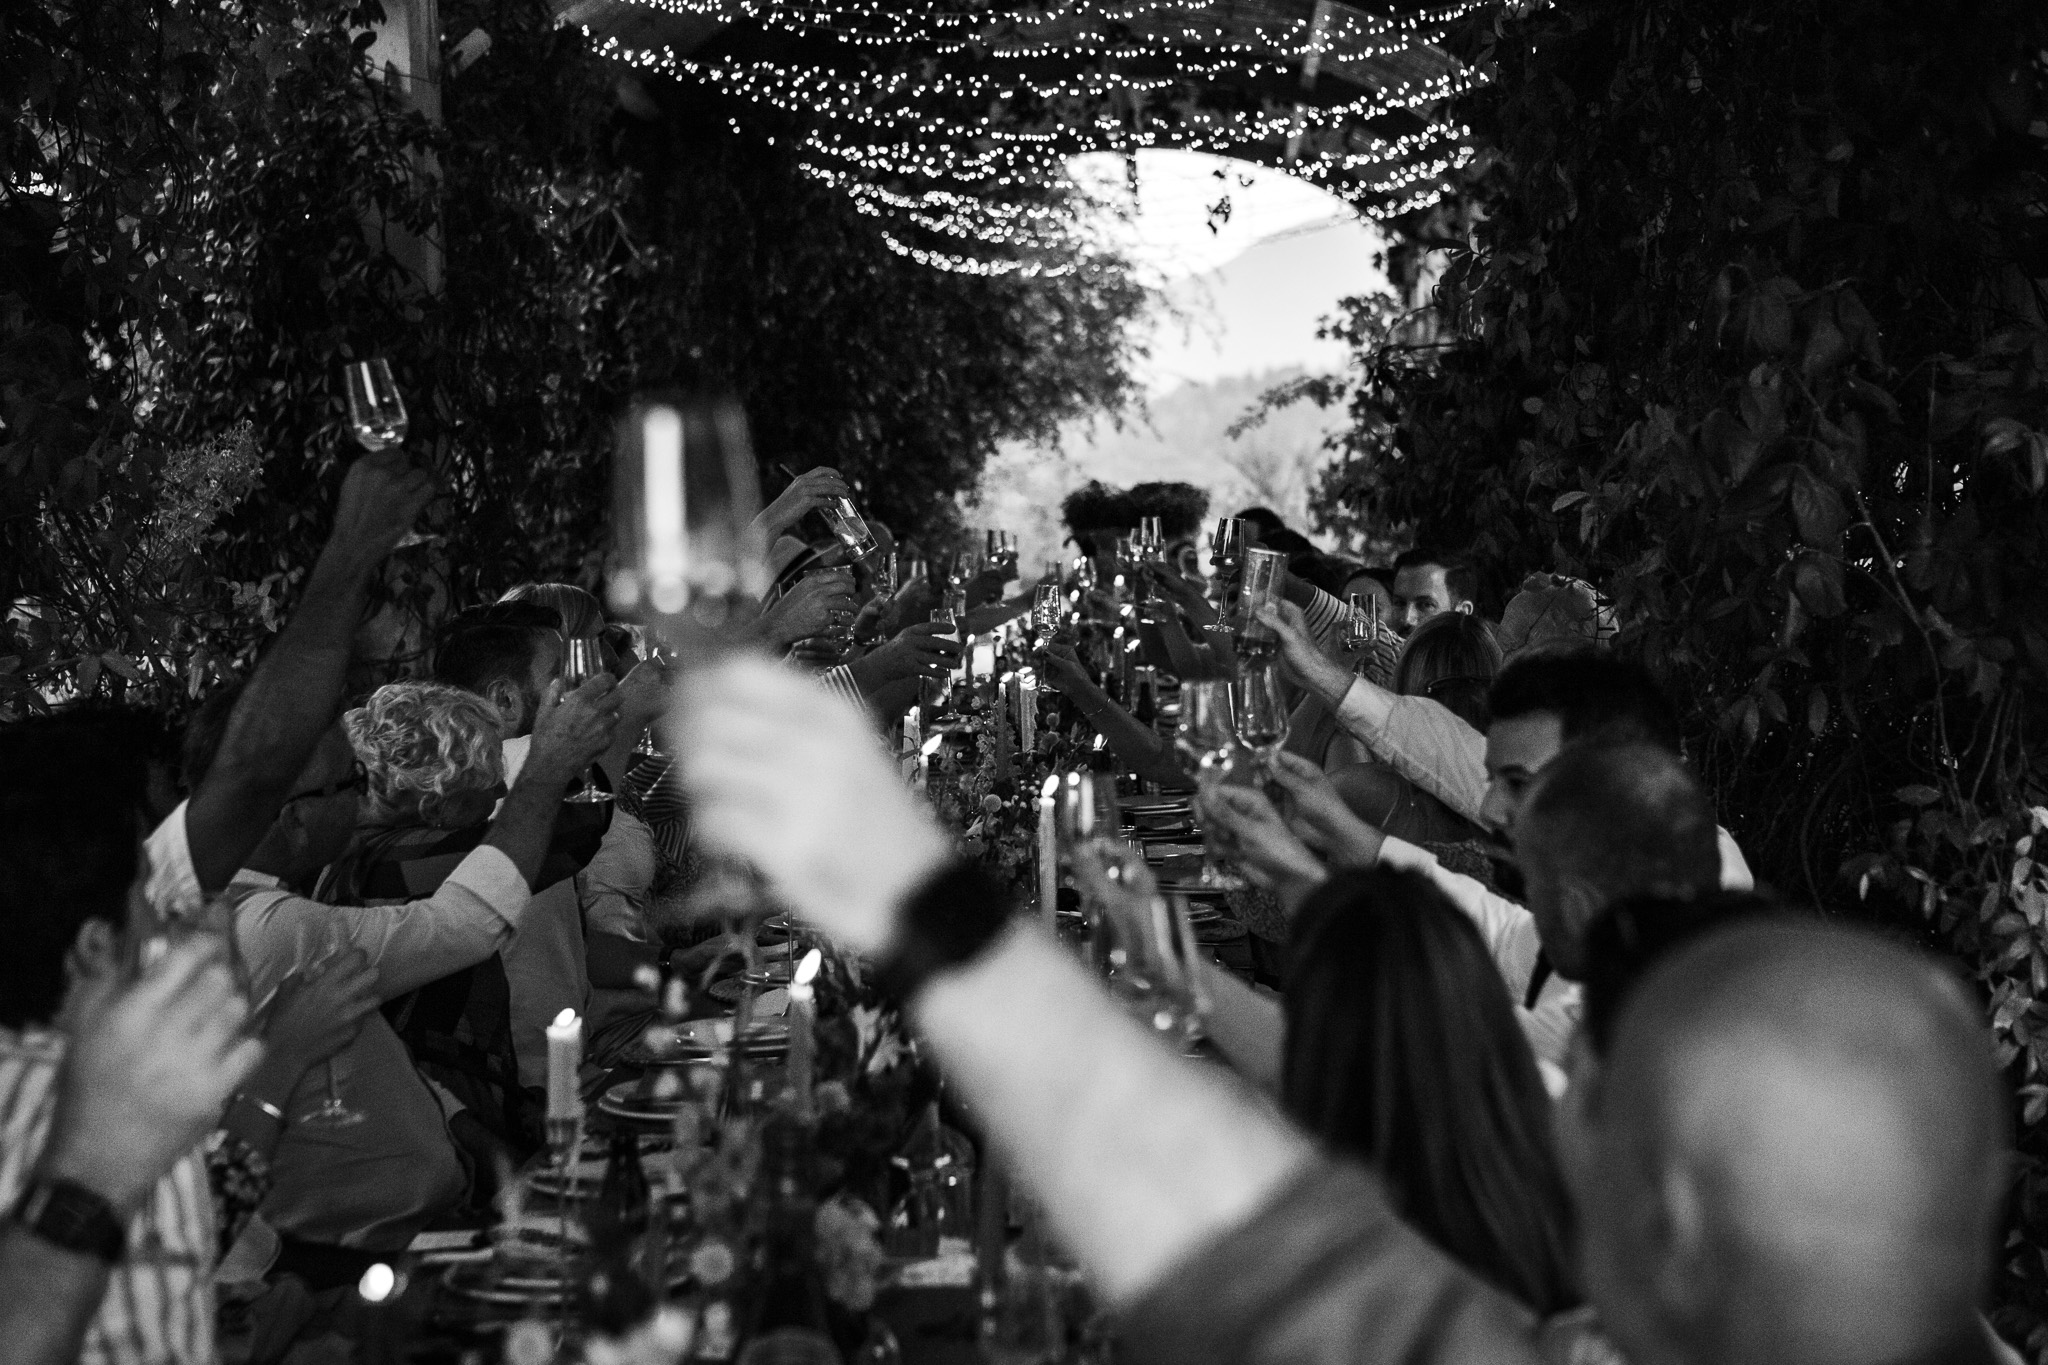 Guests raise their glasses for a toast at Ambelonas Vineyard, Corfu